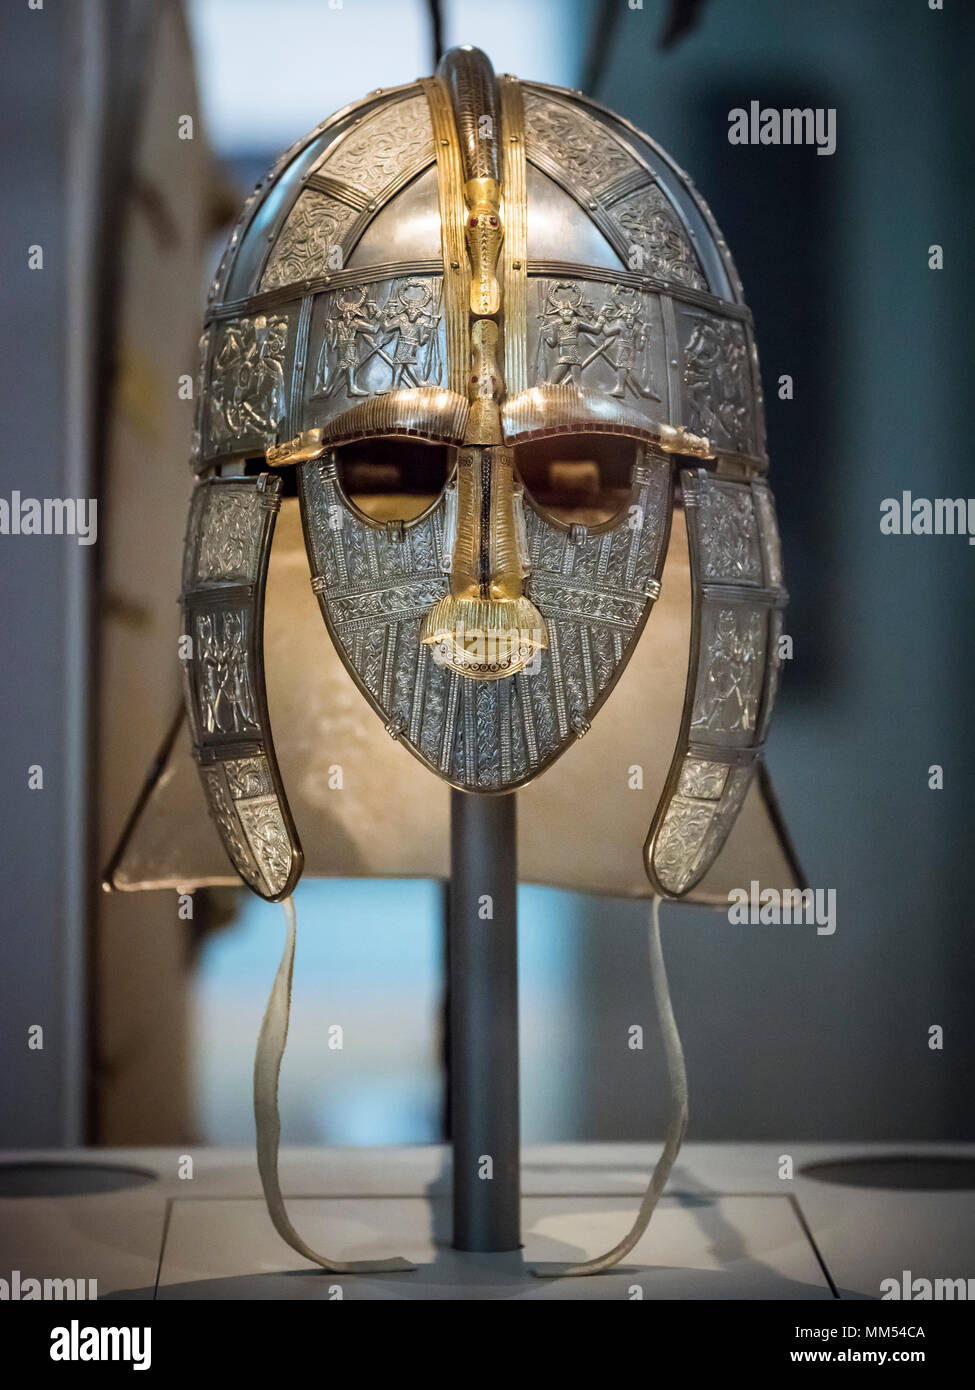 London. England. British Museum. A Replica of the Sutton Hoo Helmet made by the Royal Armouries.  The Sutton Hoo ship burial in Suffolk, England, exca Stock Photo